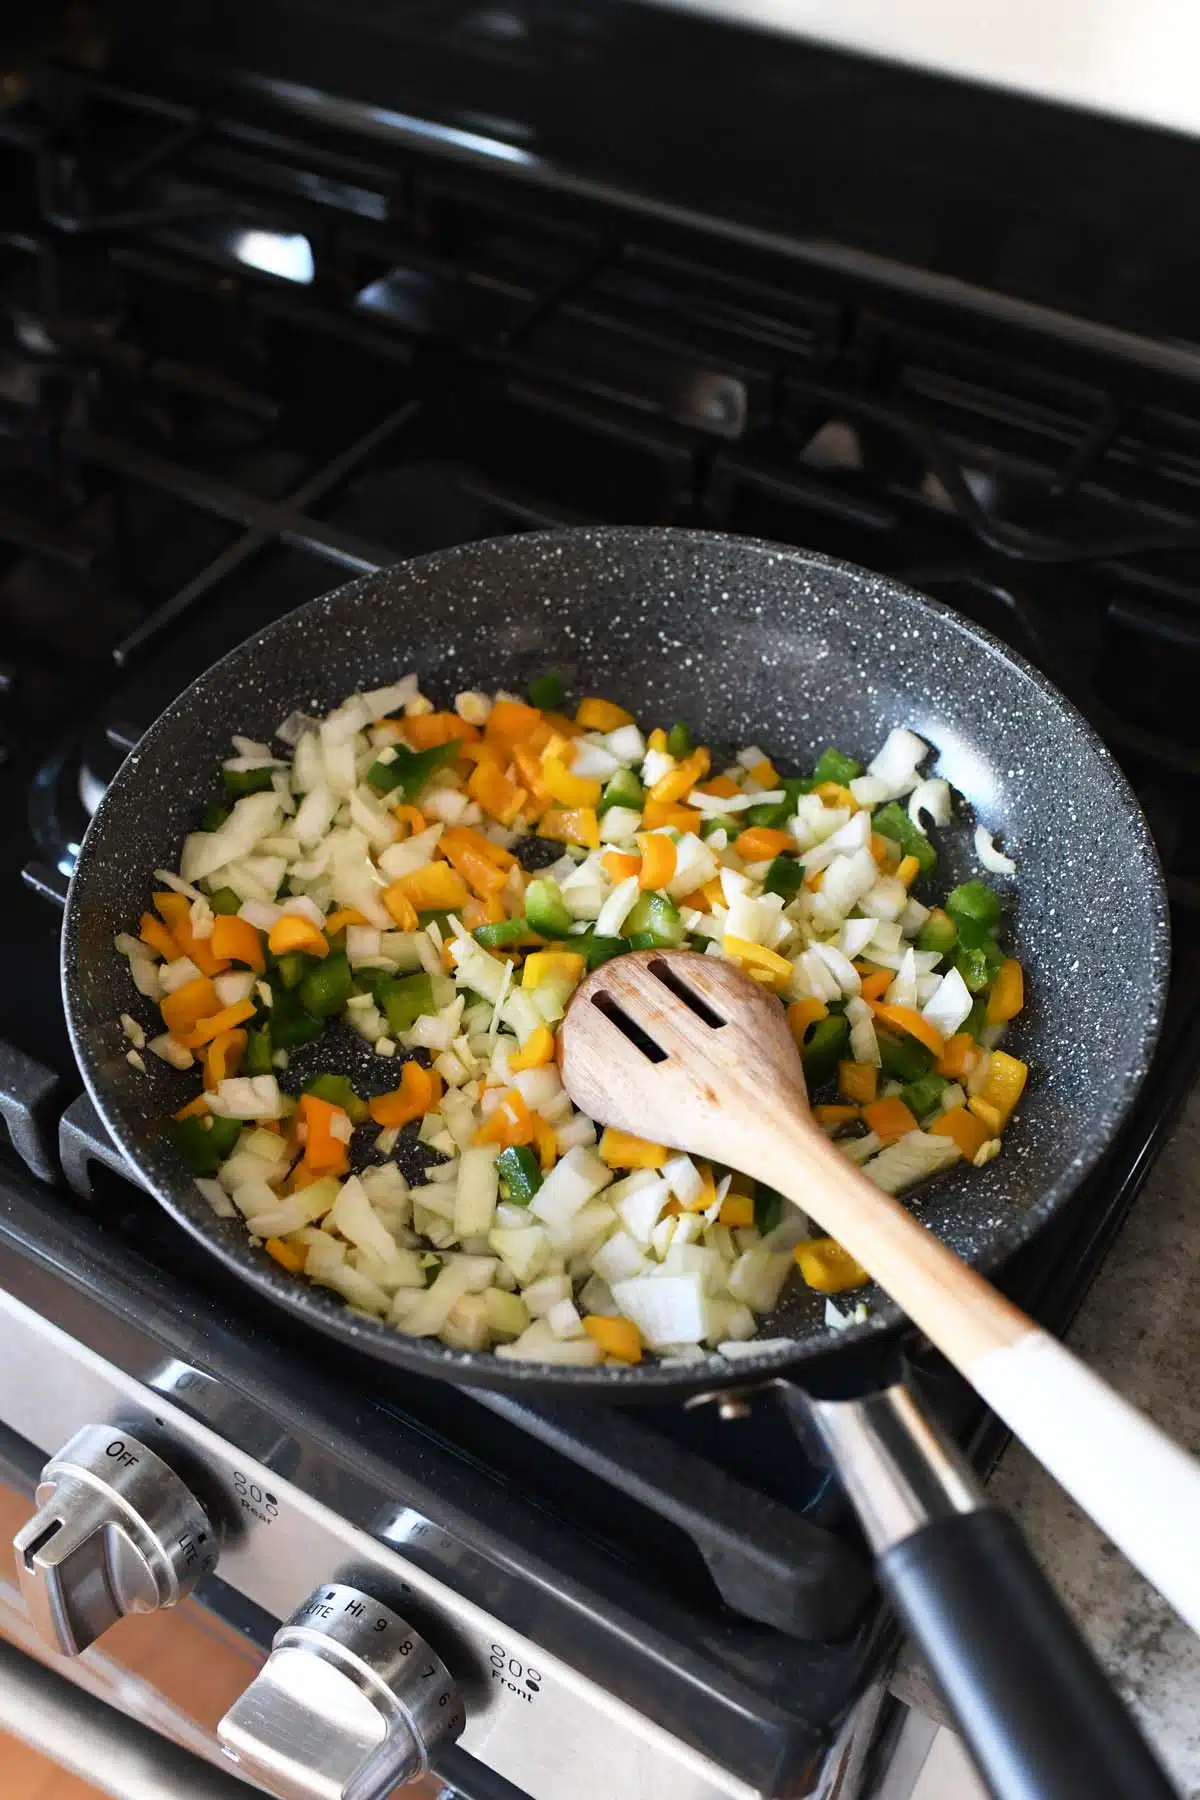 Chopped veggies in a black skillet with a wooden spoon.